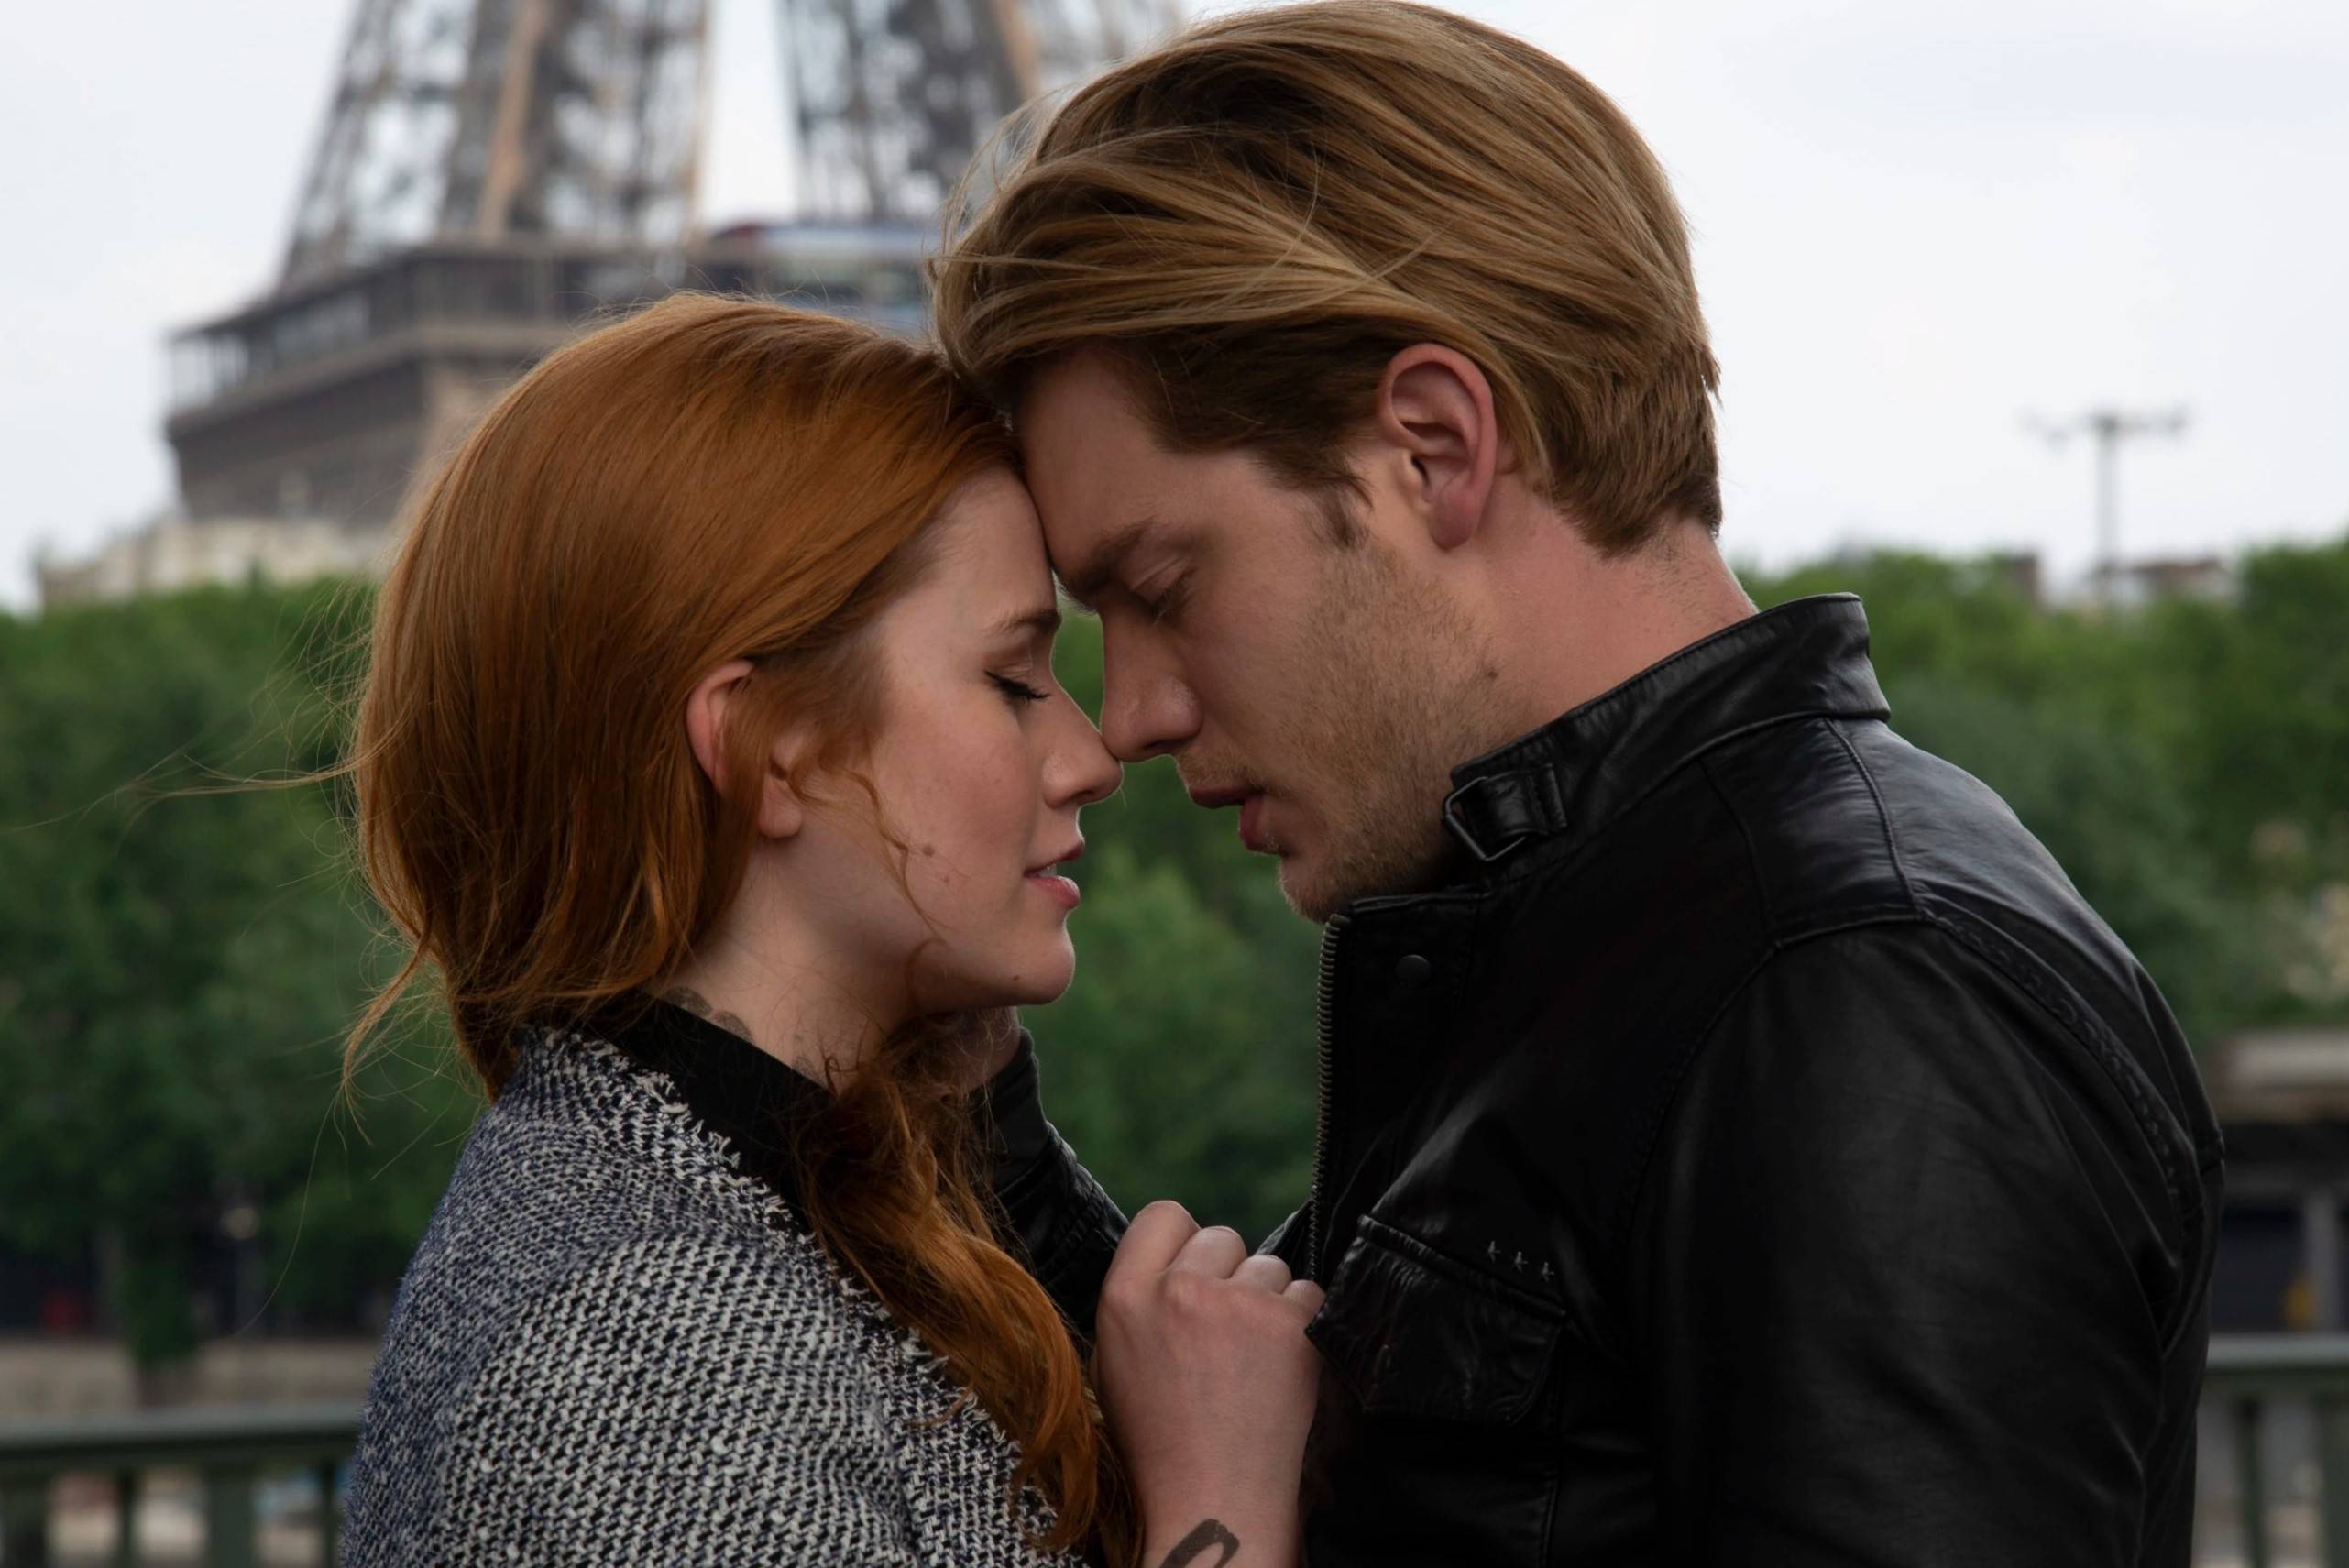 The Shocking Truth About Jace And Clary’s Relationship In The Mortal Instruments Series!